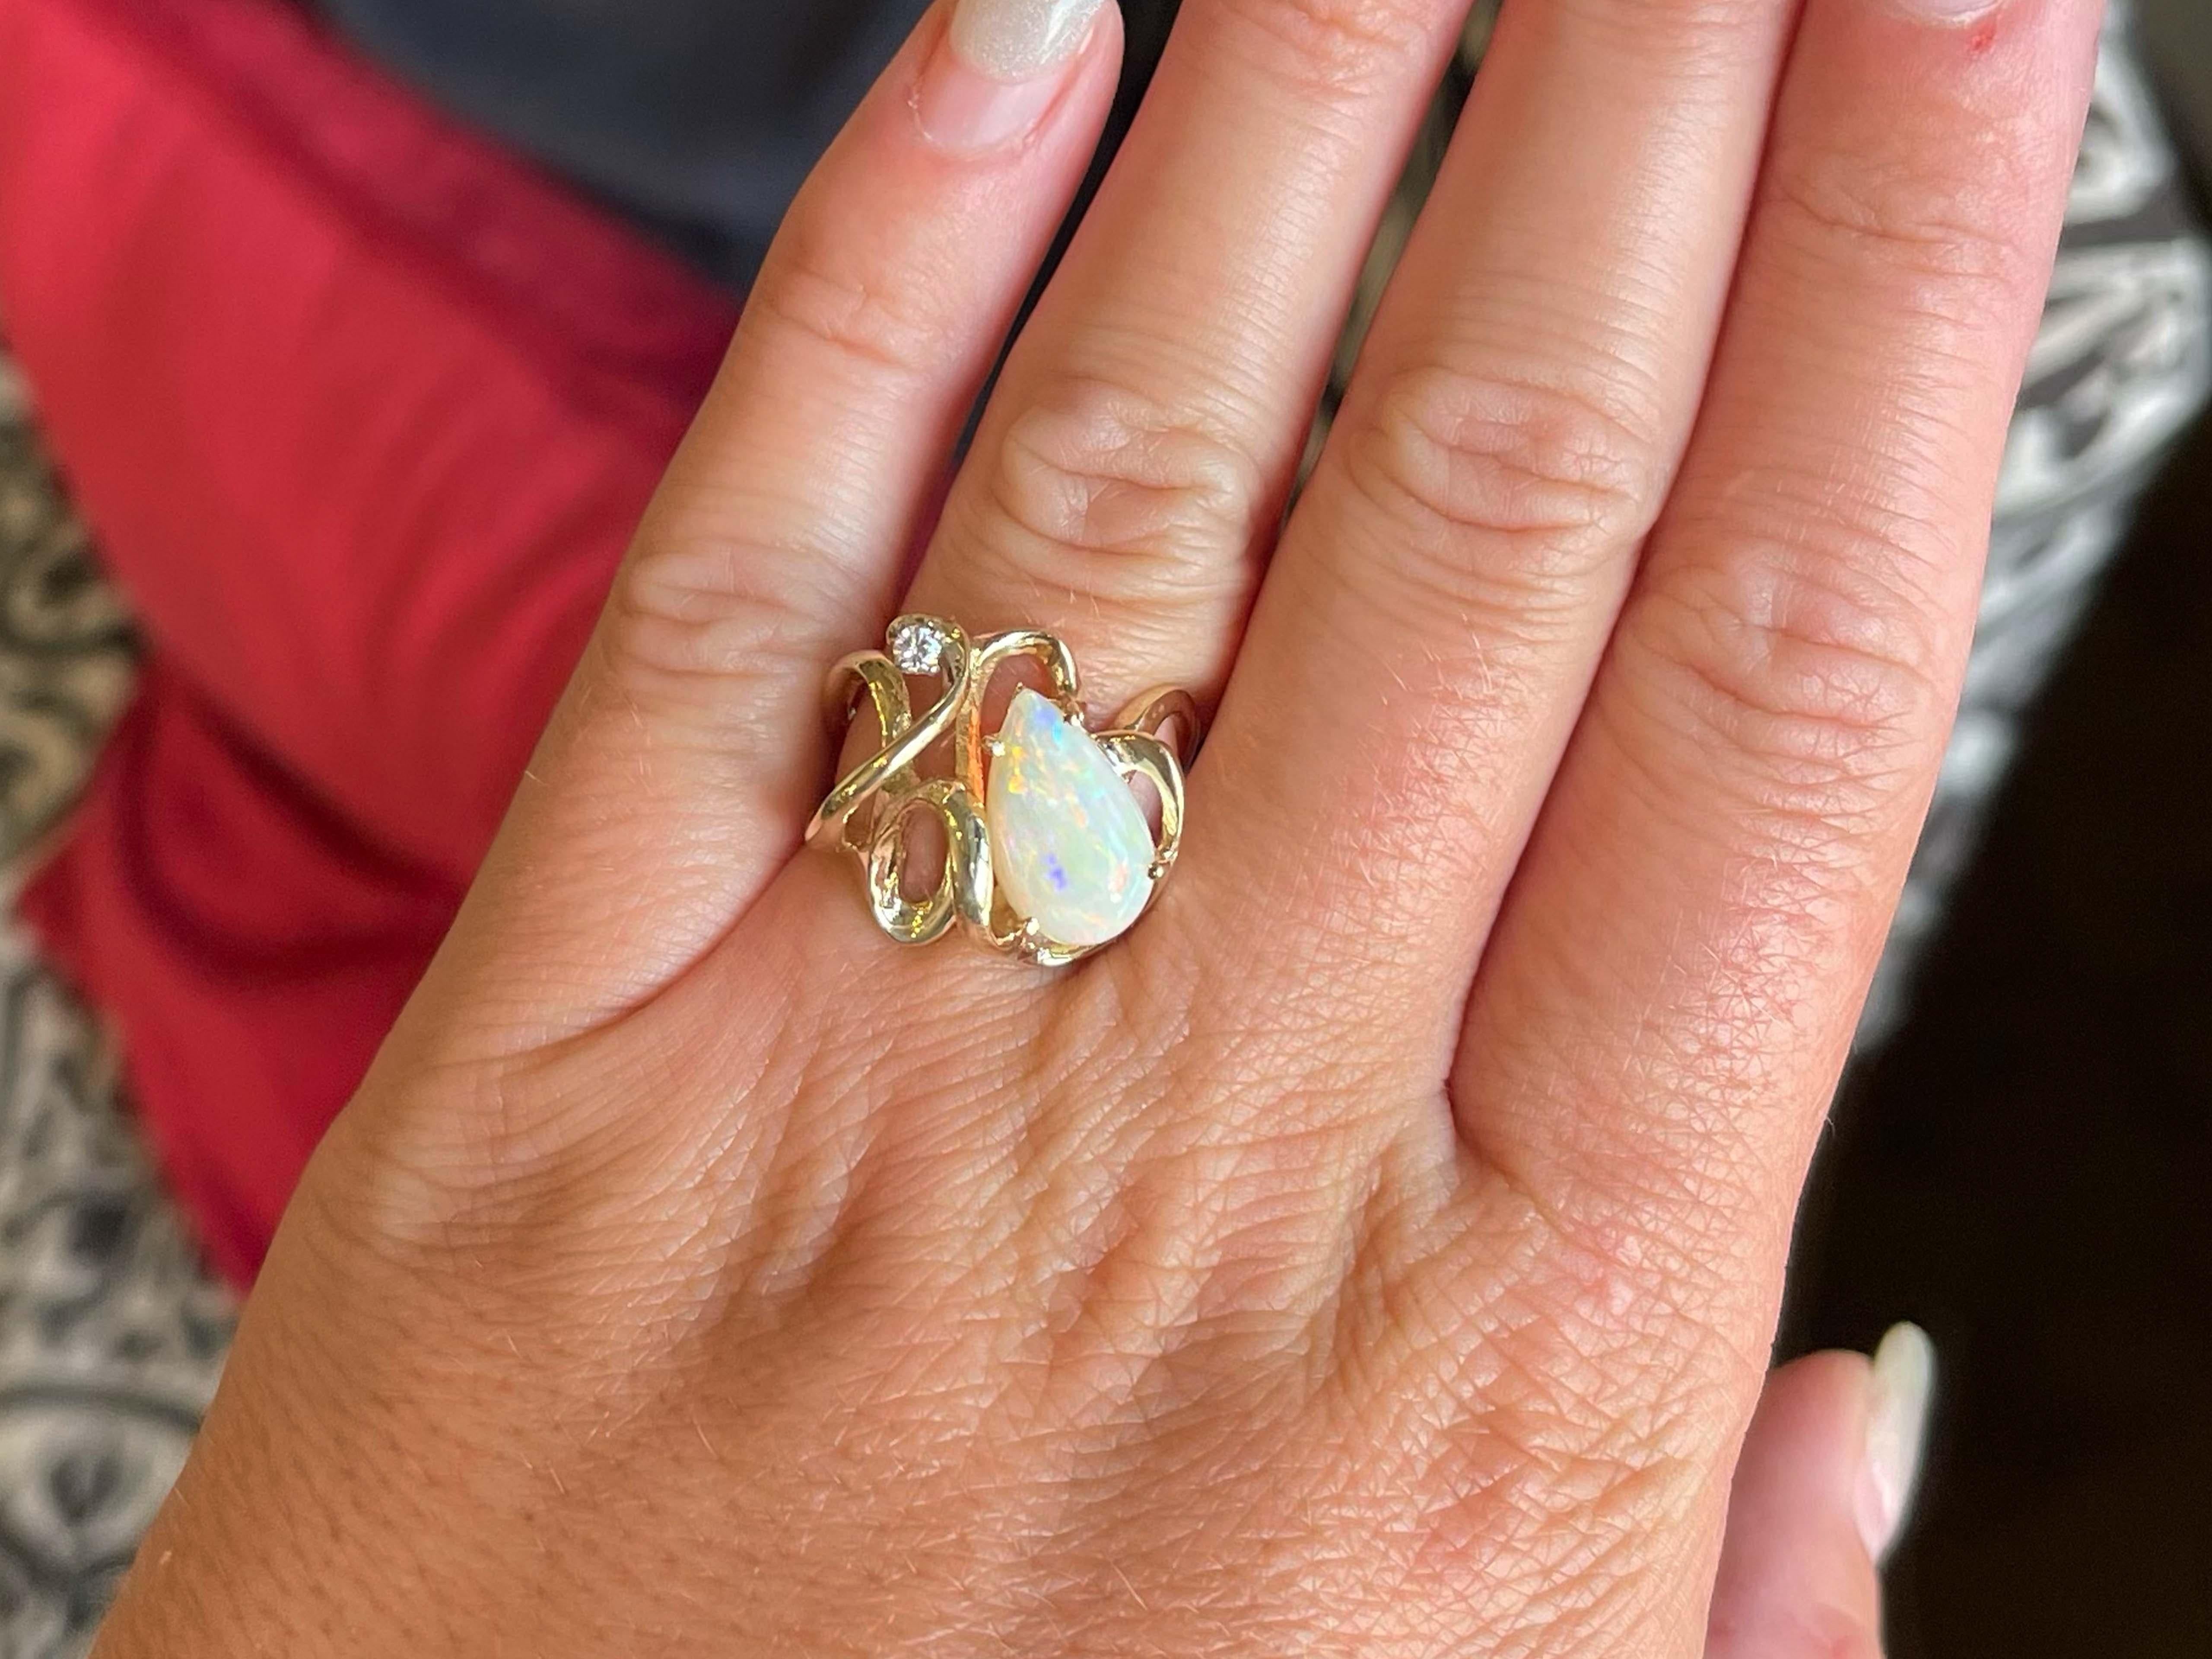 Item Specifications:

Metal: 14K Yellow Gold 

​​​Ring Size: 7

Total Weight: 6.5 Grams

Gemstone Specifications:

Center Gemstone: Opal

Gemstone Measurements: ~13.49 mm x 8 mm x 2.9 mm

Gemstone Carat Weight: ~1.02 carats

Diamond Count: